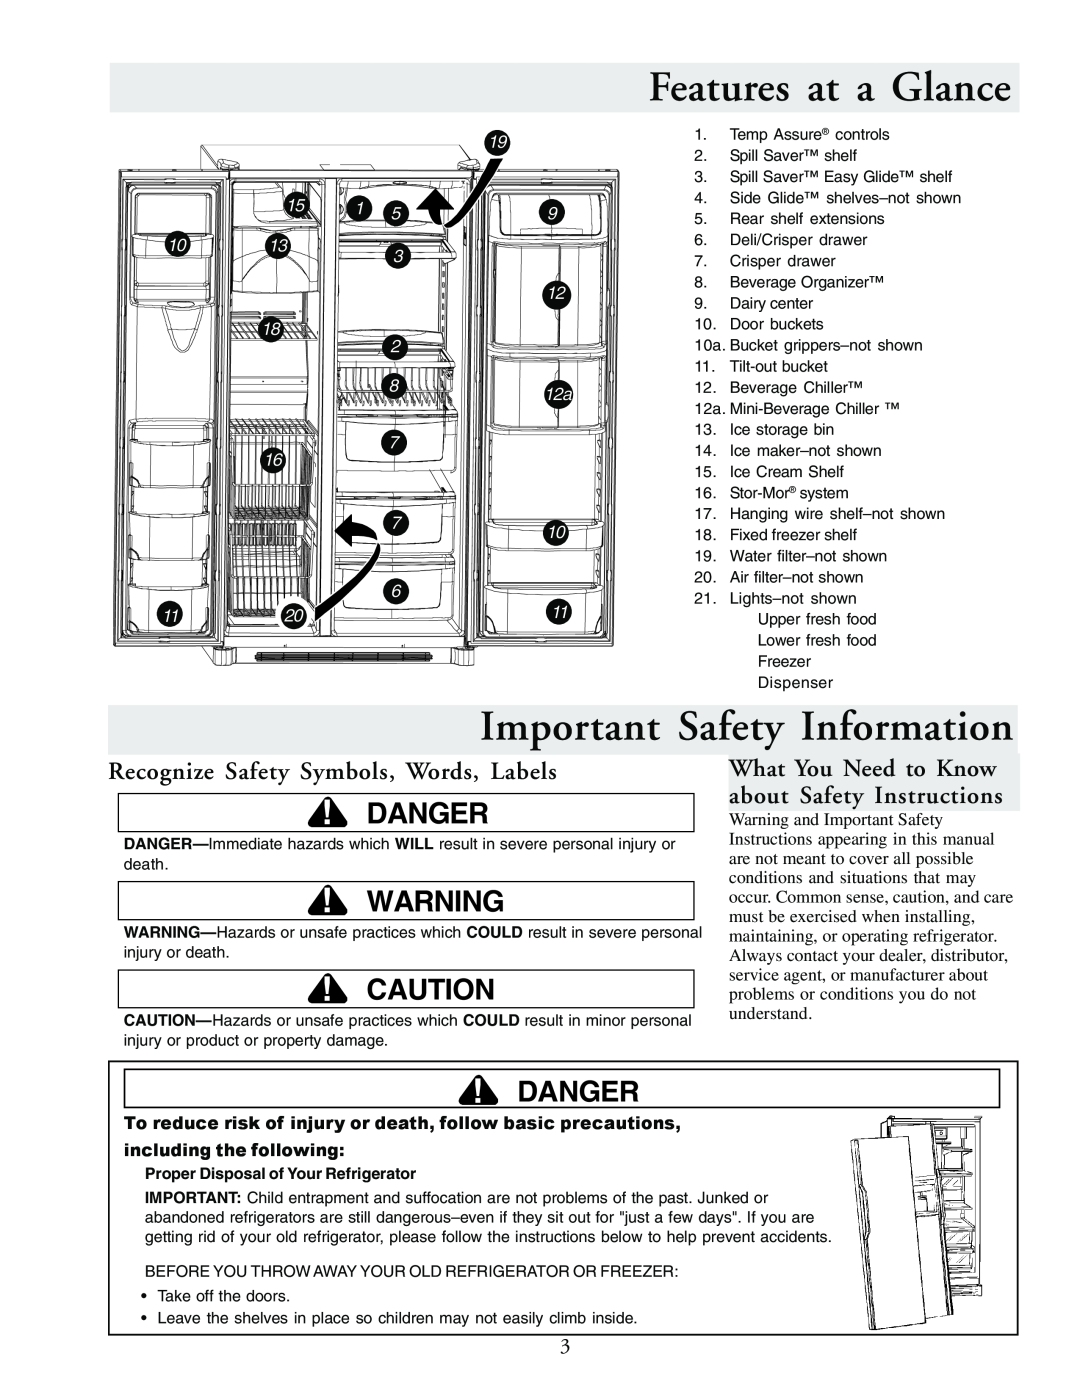 Amana XRSR687BW Features at a Glance, Important Safety Information, Danger, Recognize Safety Symbols, Words, Labels 